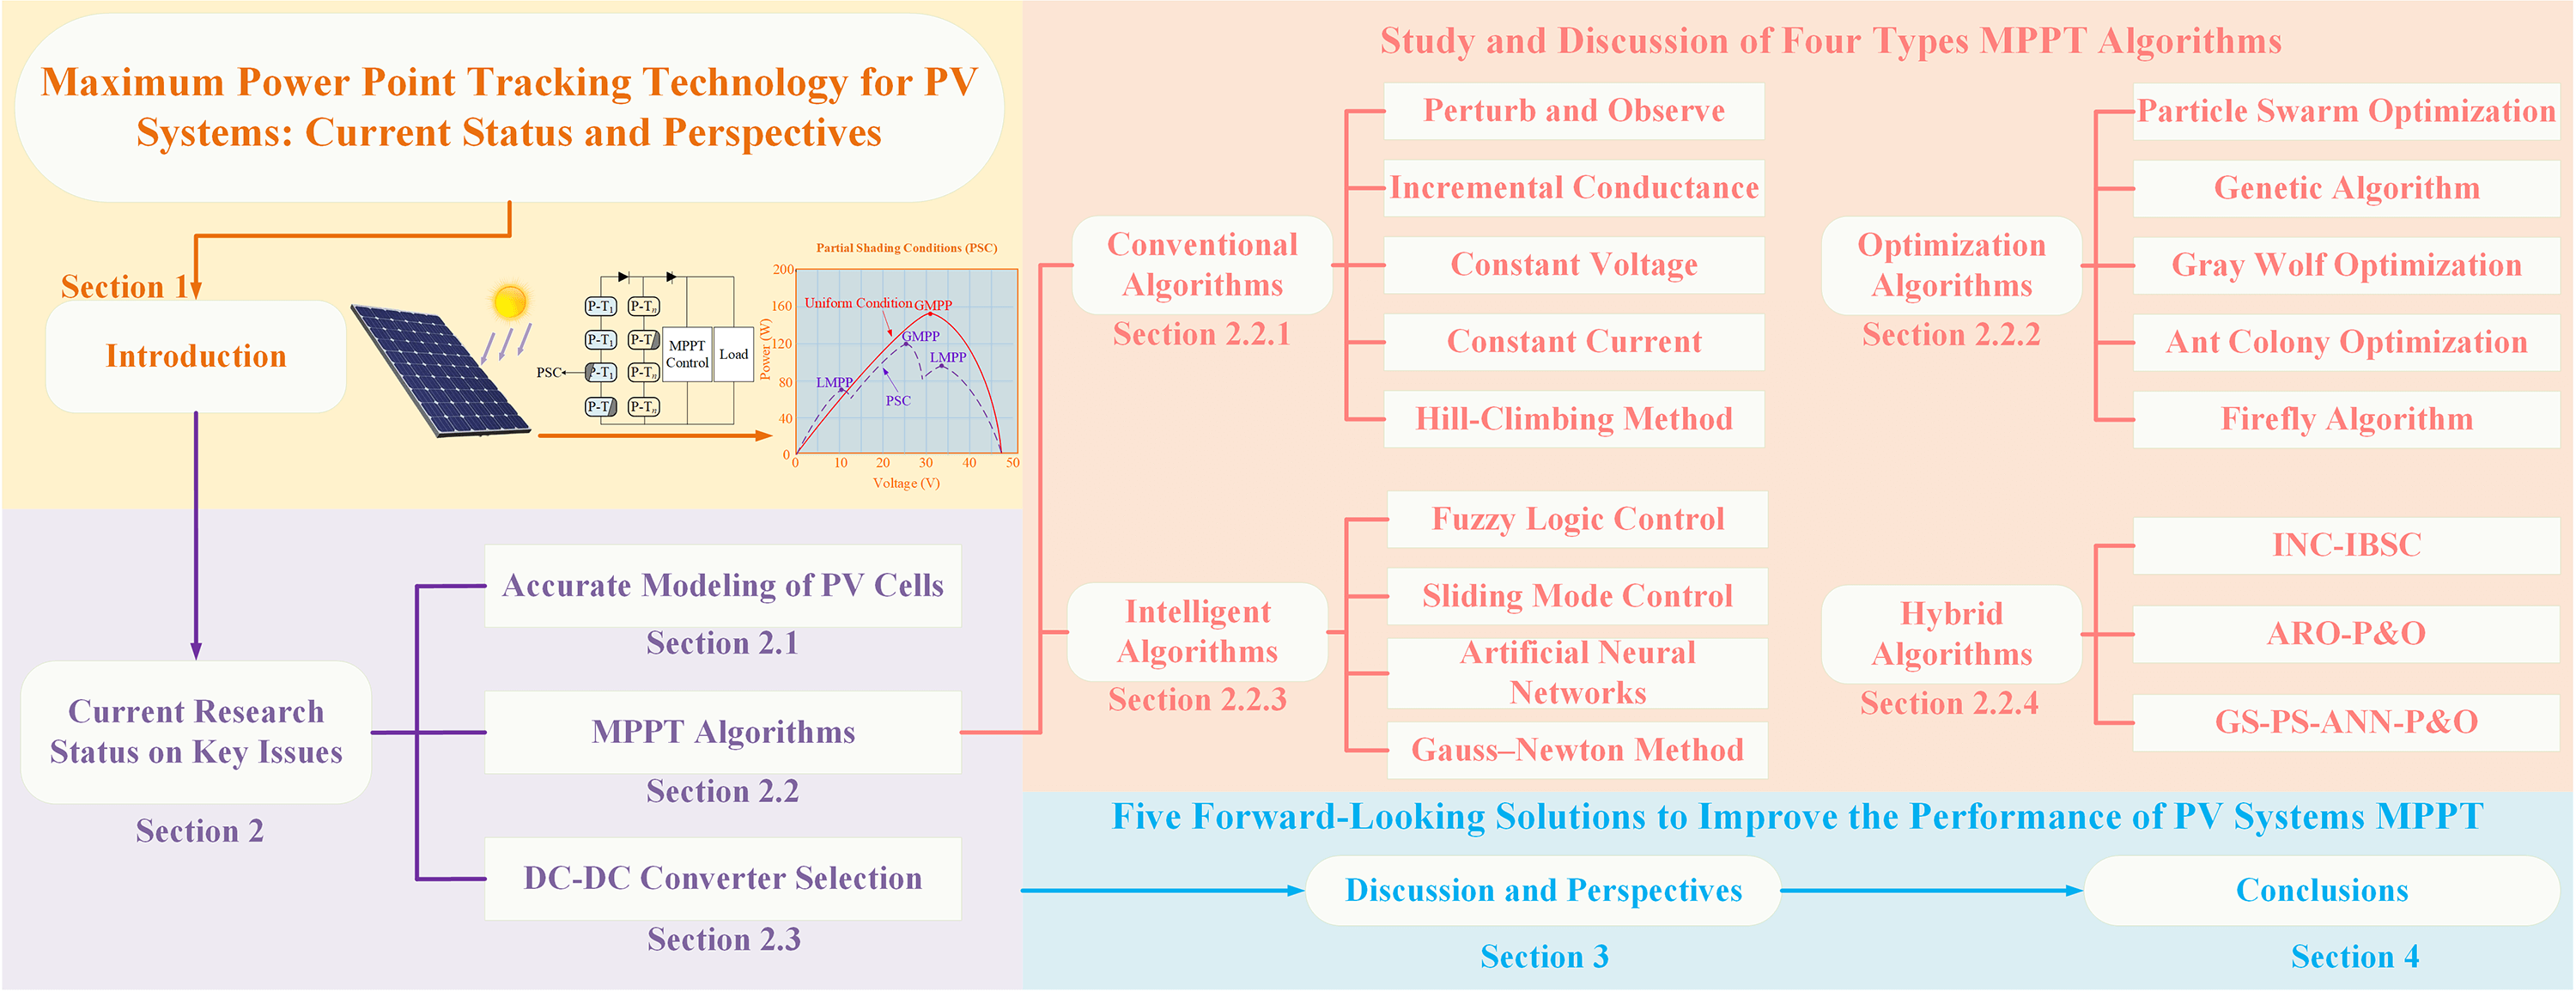 Maximum Power Point Tracking Technology for PV Systems: Current Status and Perspectives